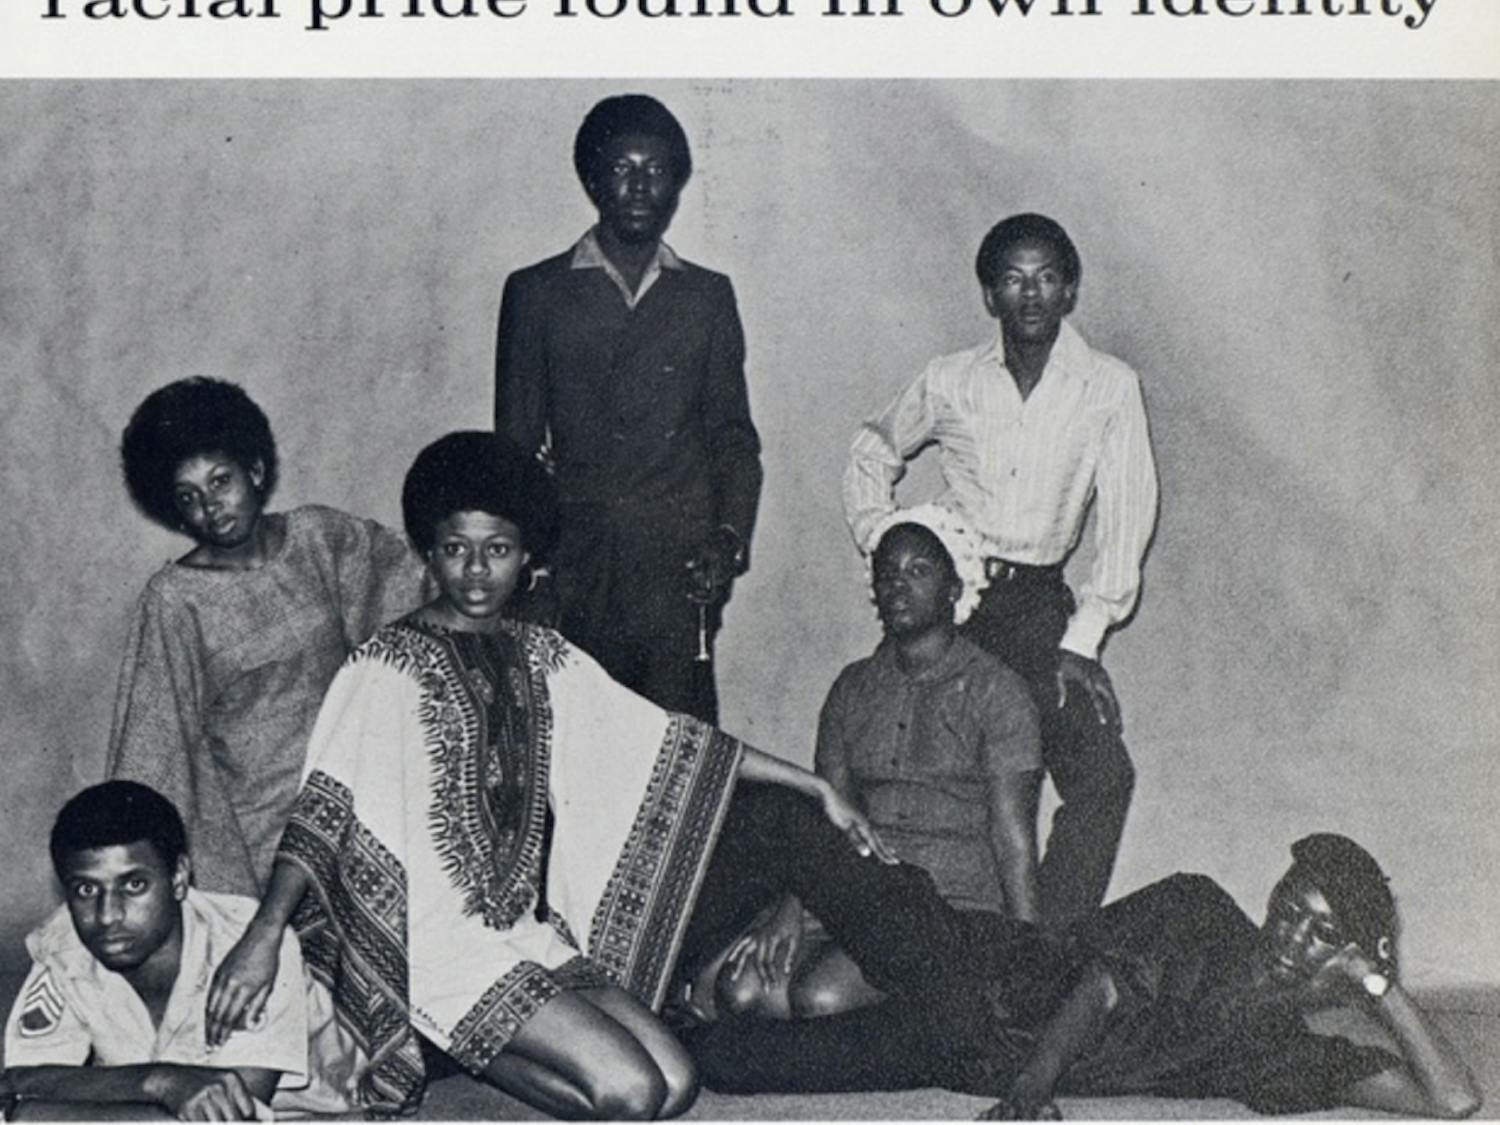 Black UF students pose for a photo in the 1970 university yearbook. The UF African American Studies program was founded in 1969.&nbsp;